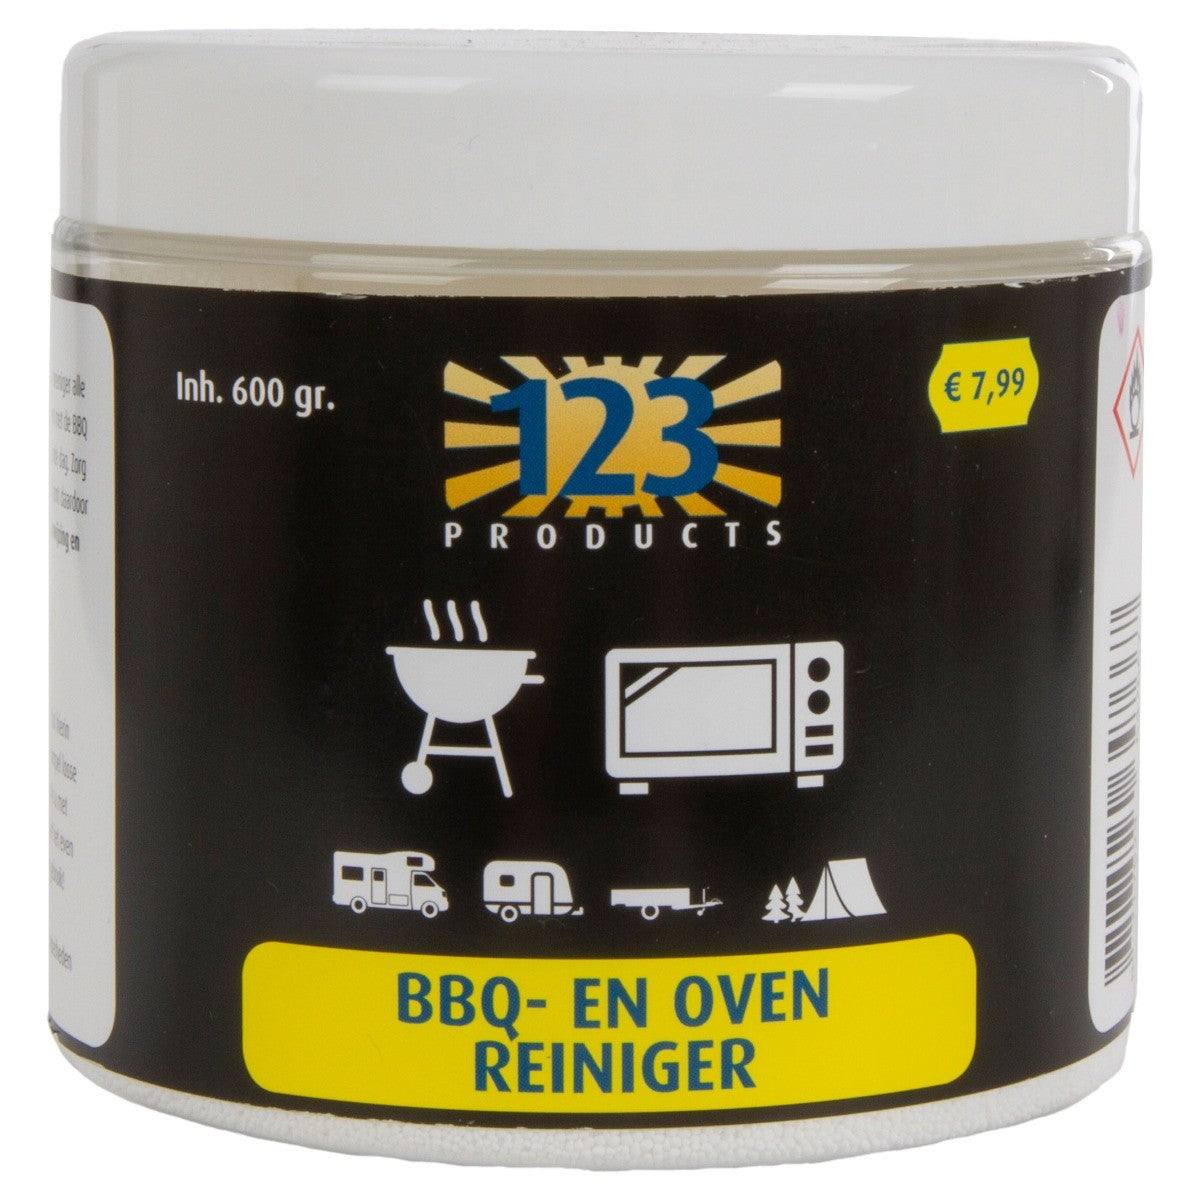 123 Products BBQ & Oven Reiniger 600G